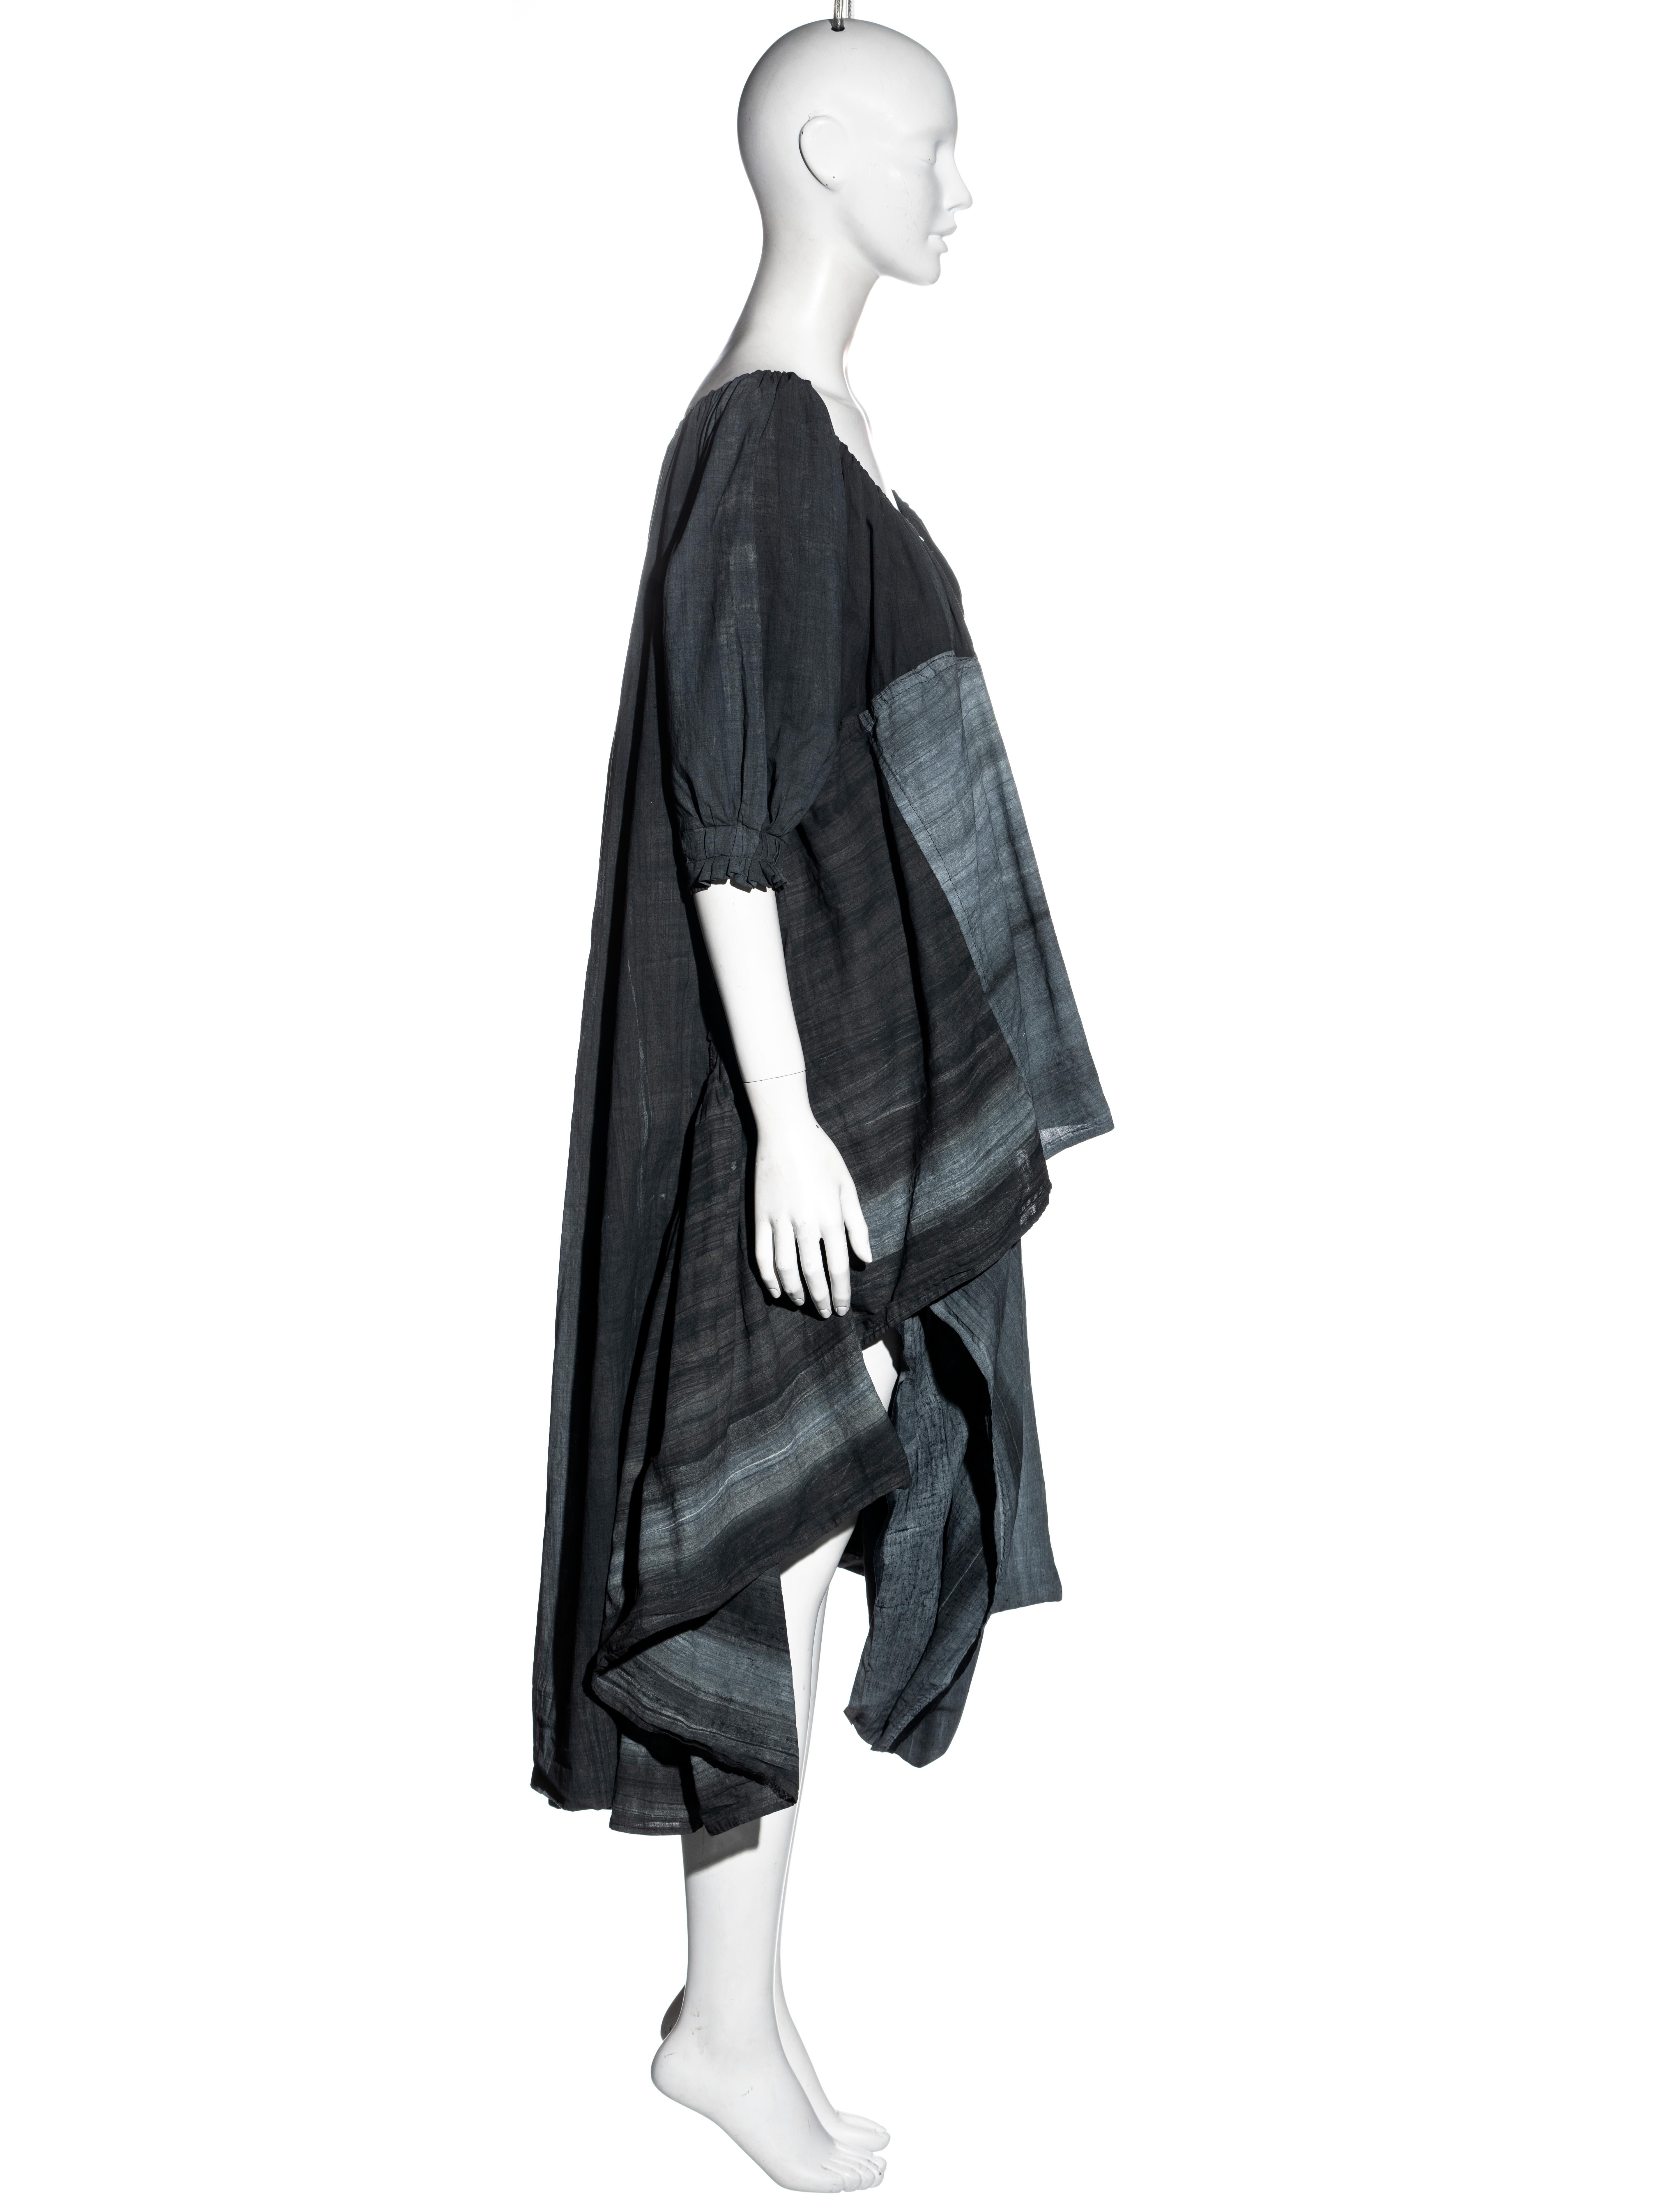 Women's Worlds End by Vivienne Westwood and Malcolm McLaren grey smock dress, ss 1983 For Sale